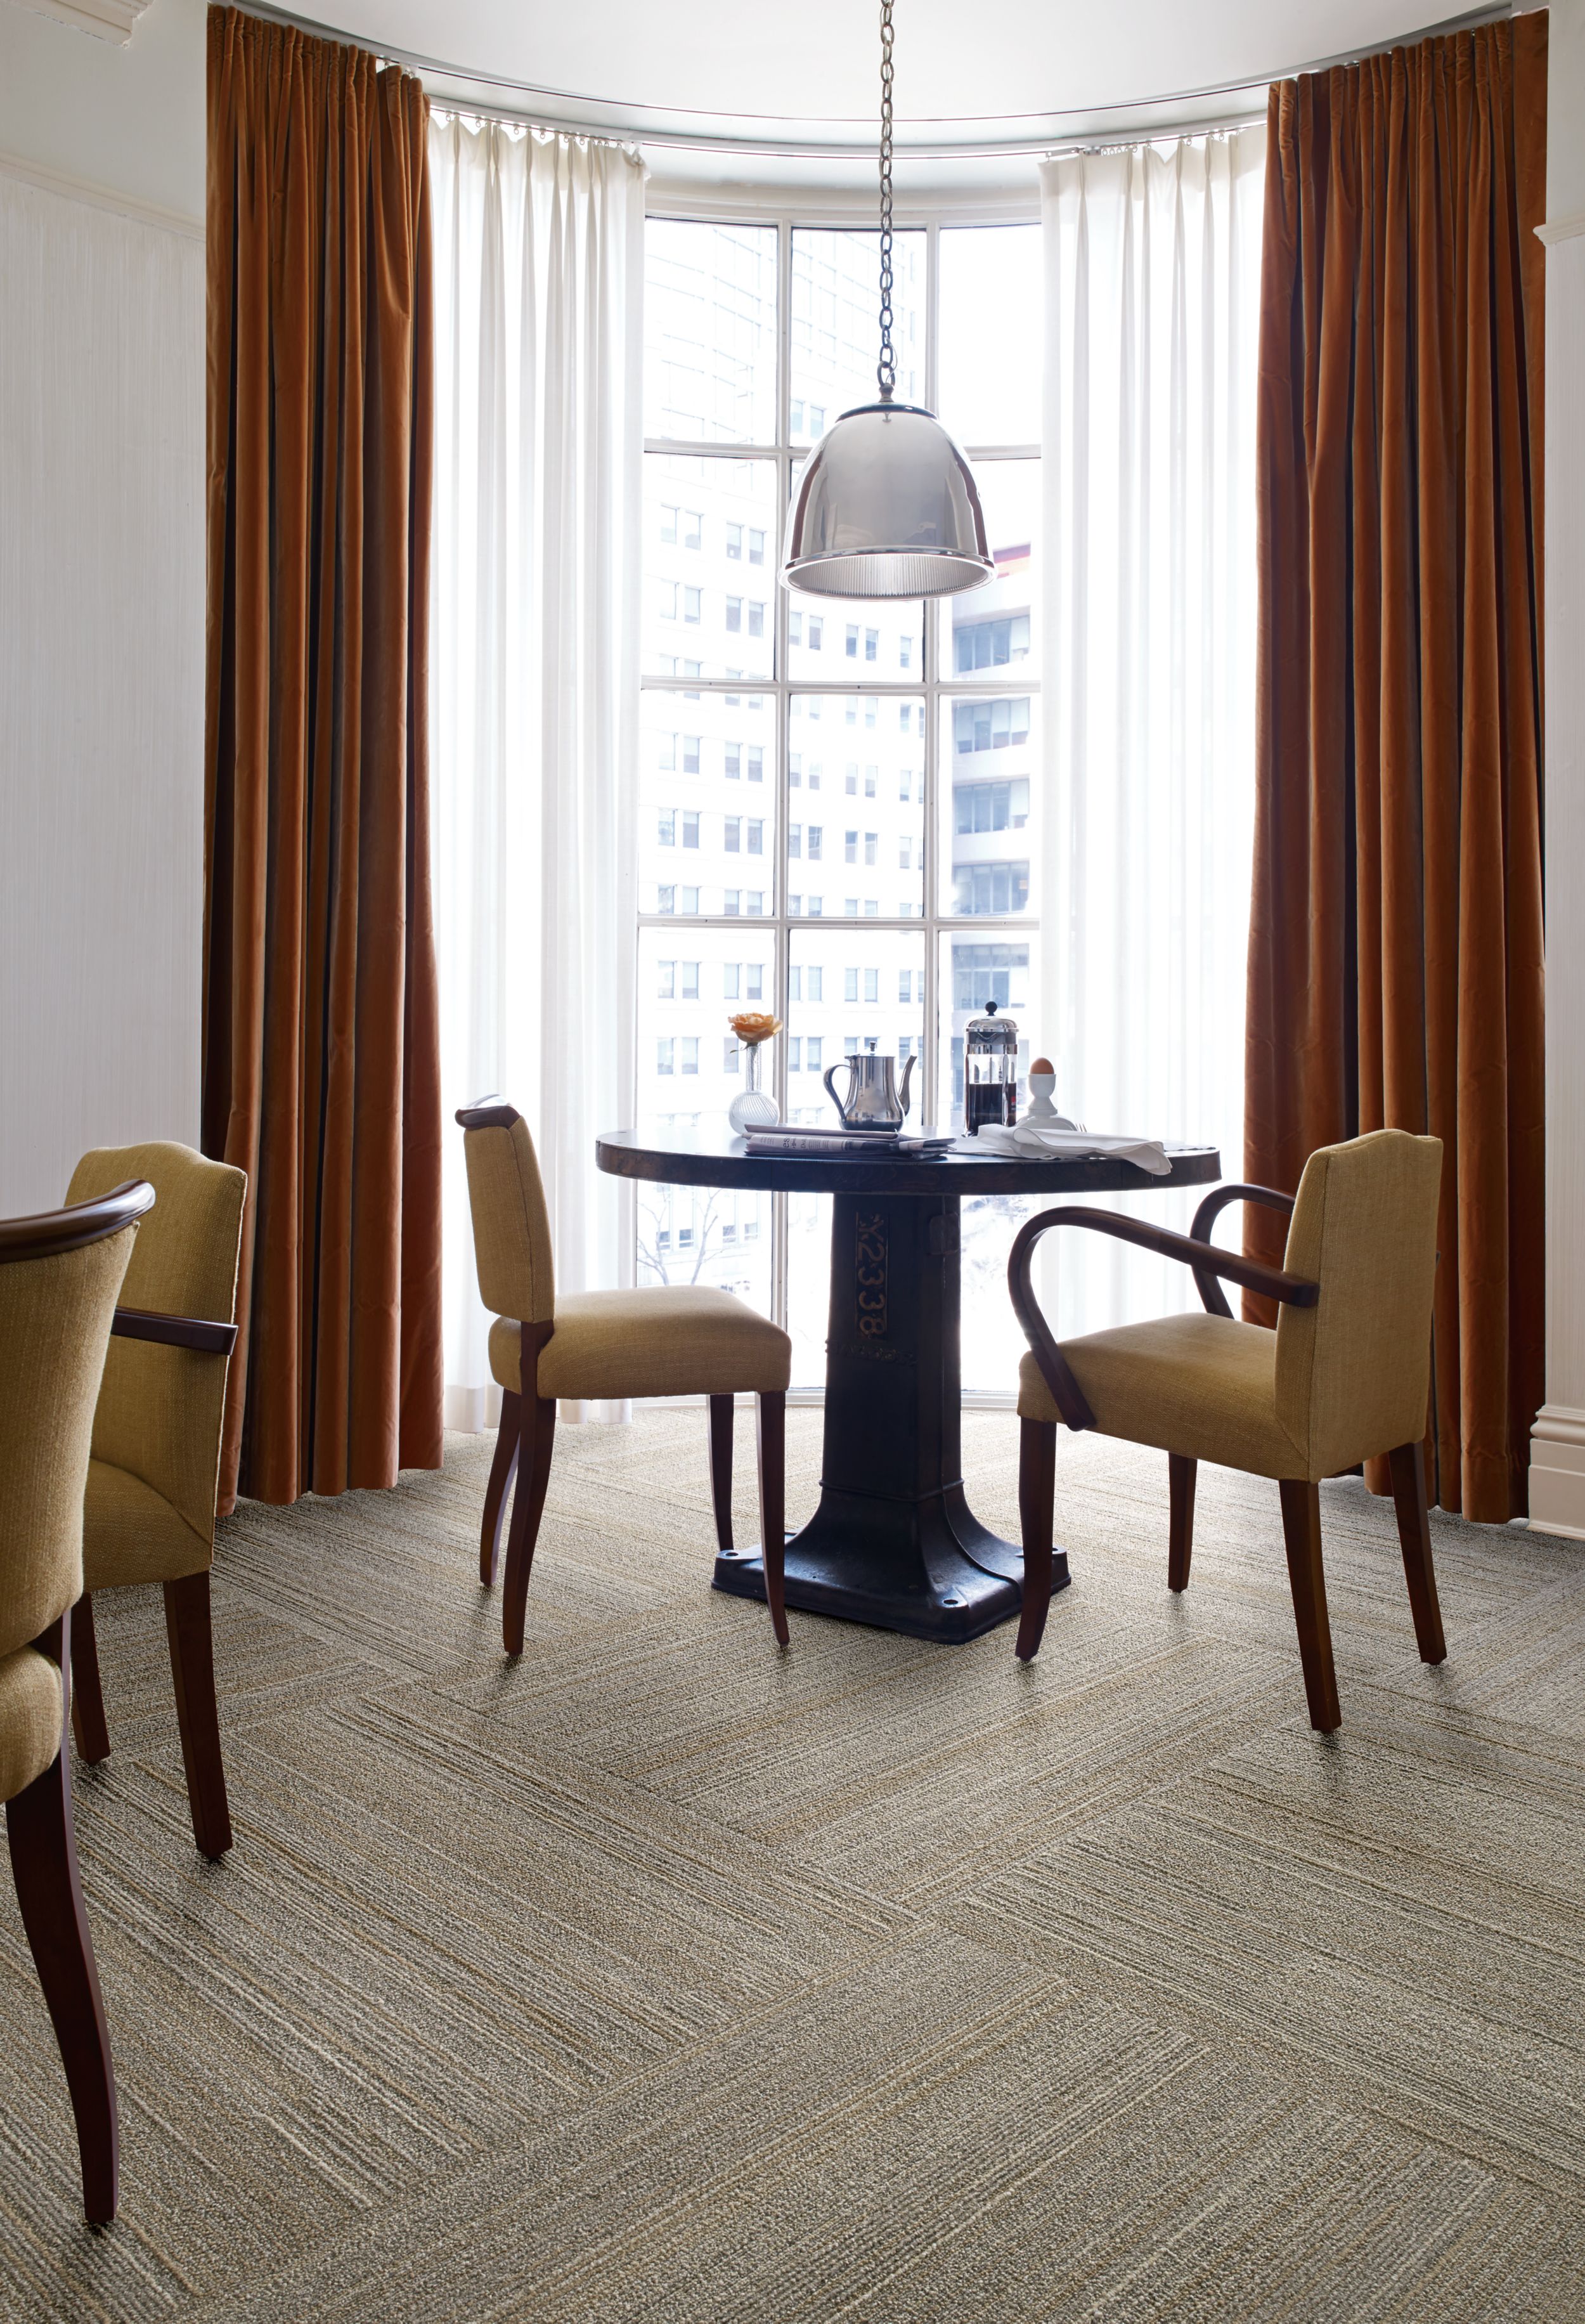 Interface NF400 plank carpet tile at small breakfast table in front of window número de imagen 7